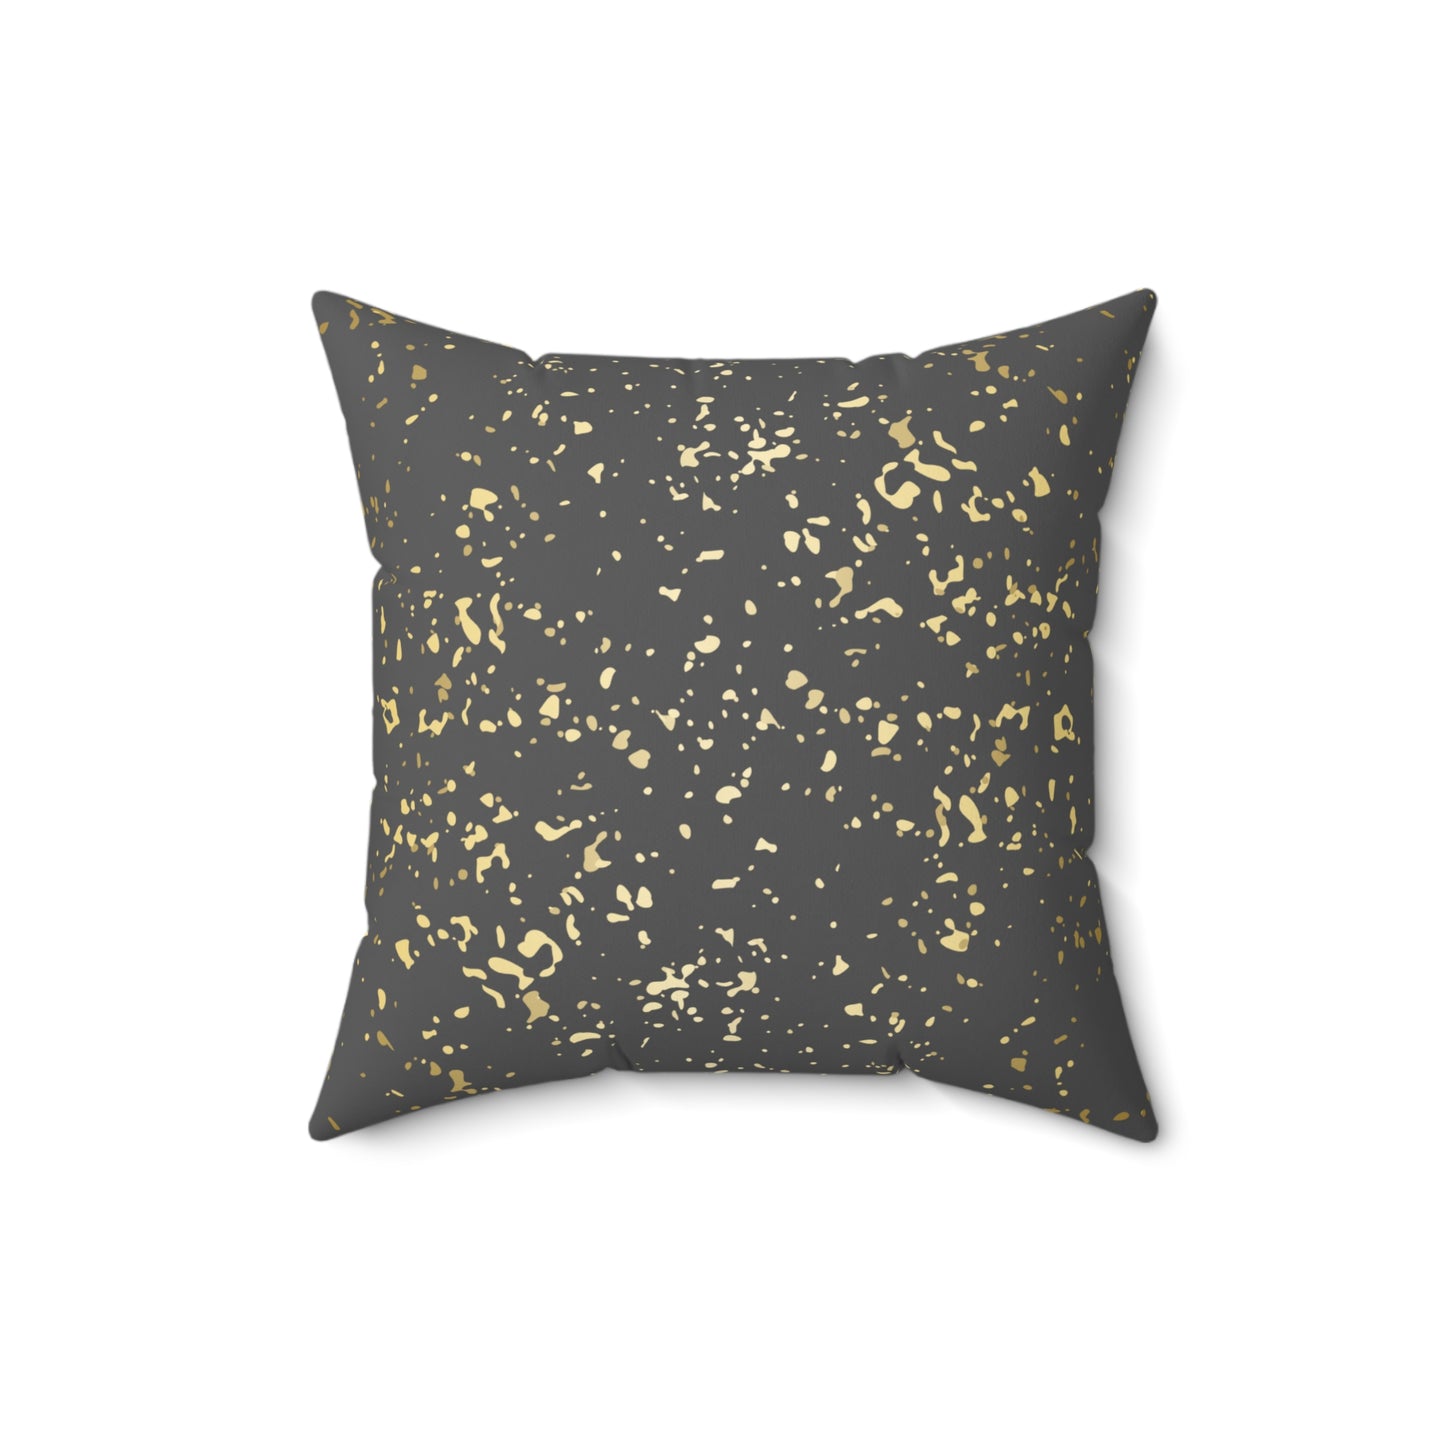 Dark Gray and Gold Flakes Throw Pillow